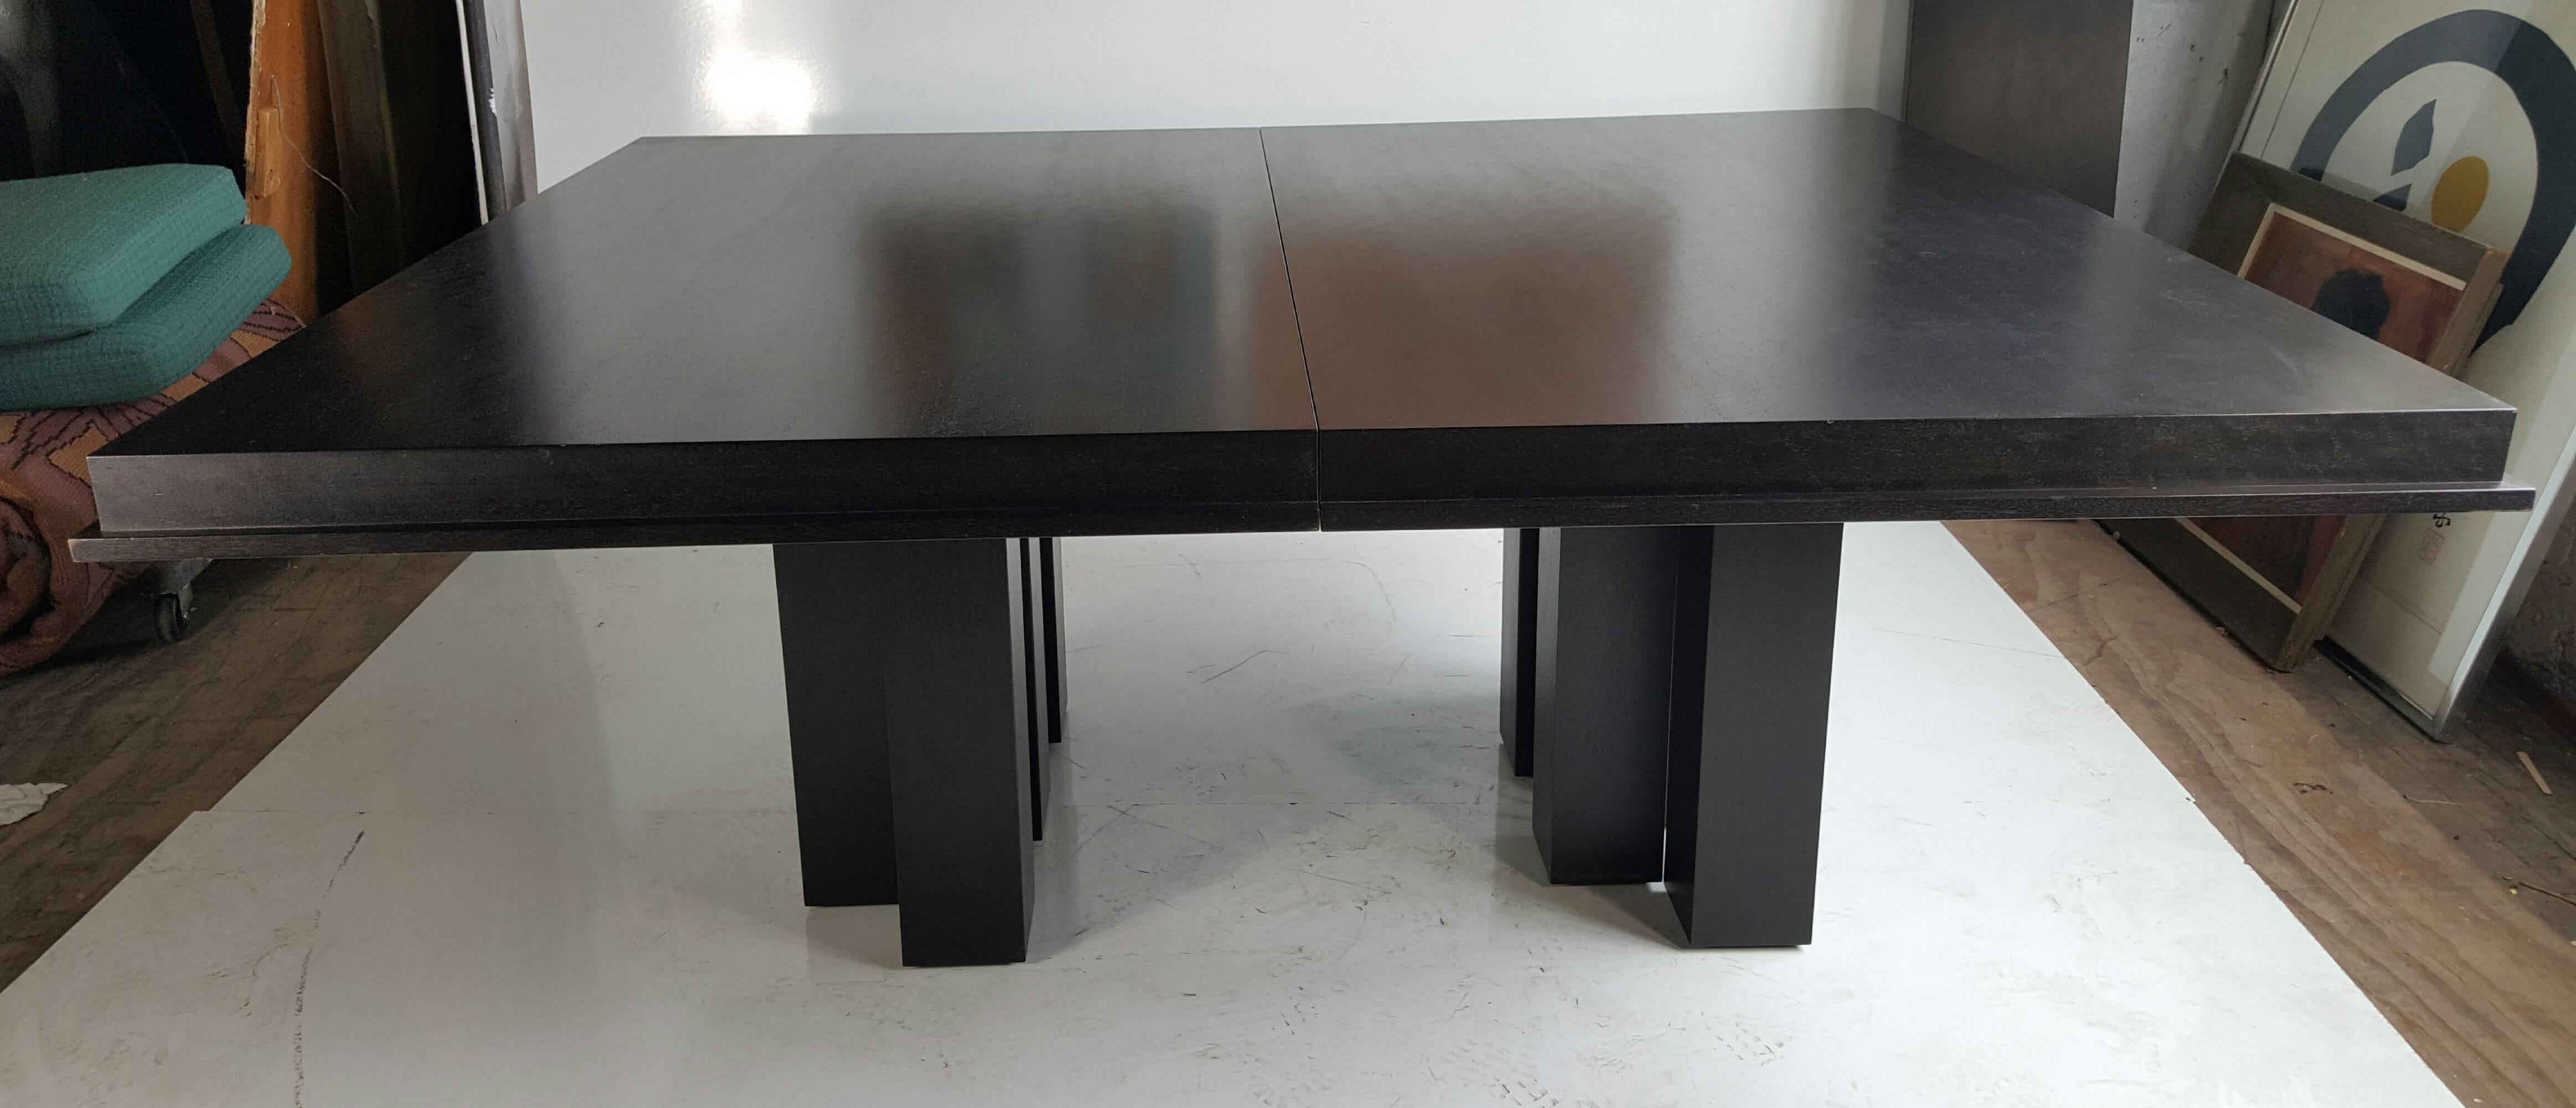 Massive Anoline dye black mahogany dining table by Wendell Castle for Icon Design.

Quietly one of his most beautiful pieces, elegant details abound in the Sorcerer. Wendell designed the modern table with two leaves, world-class veneer, and a